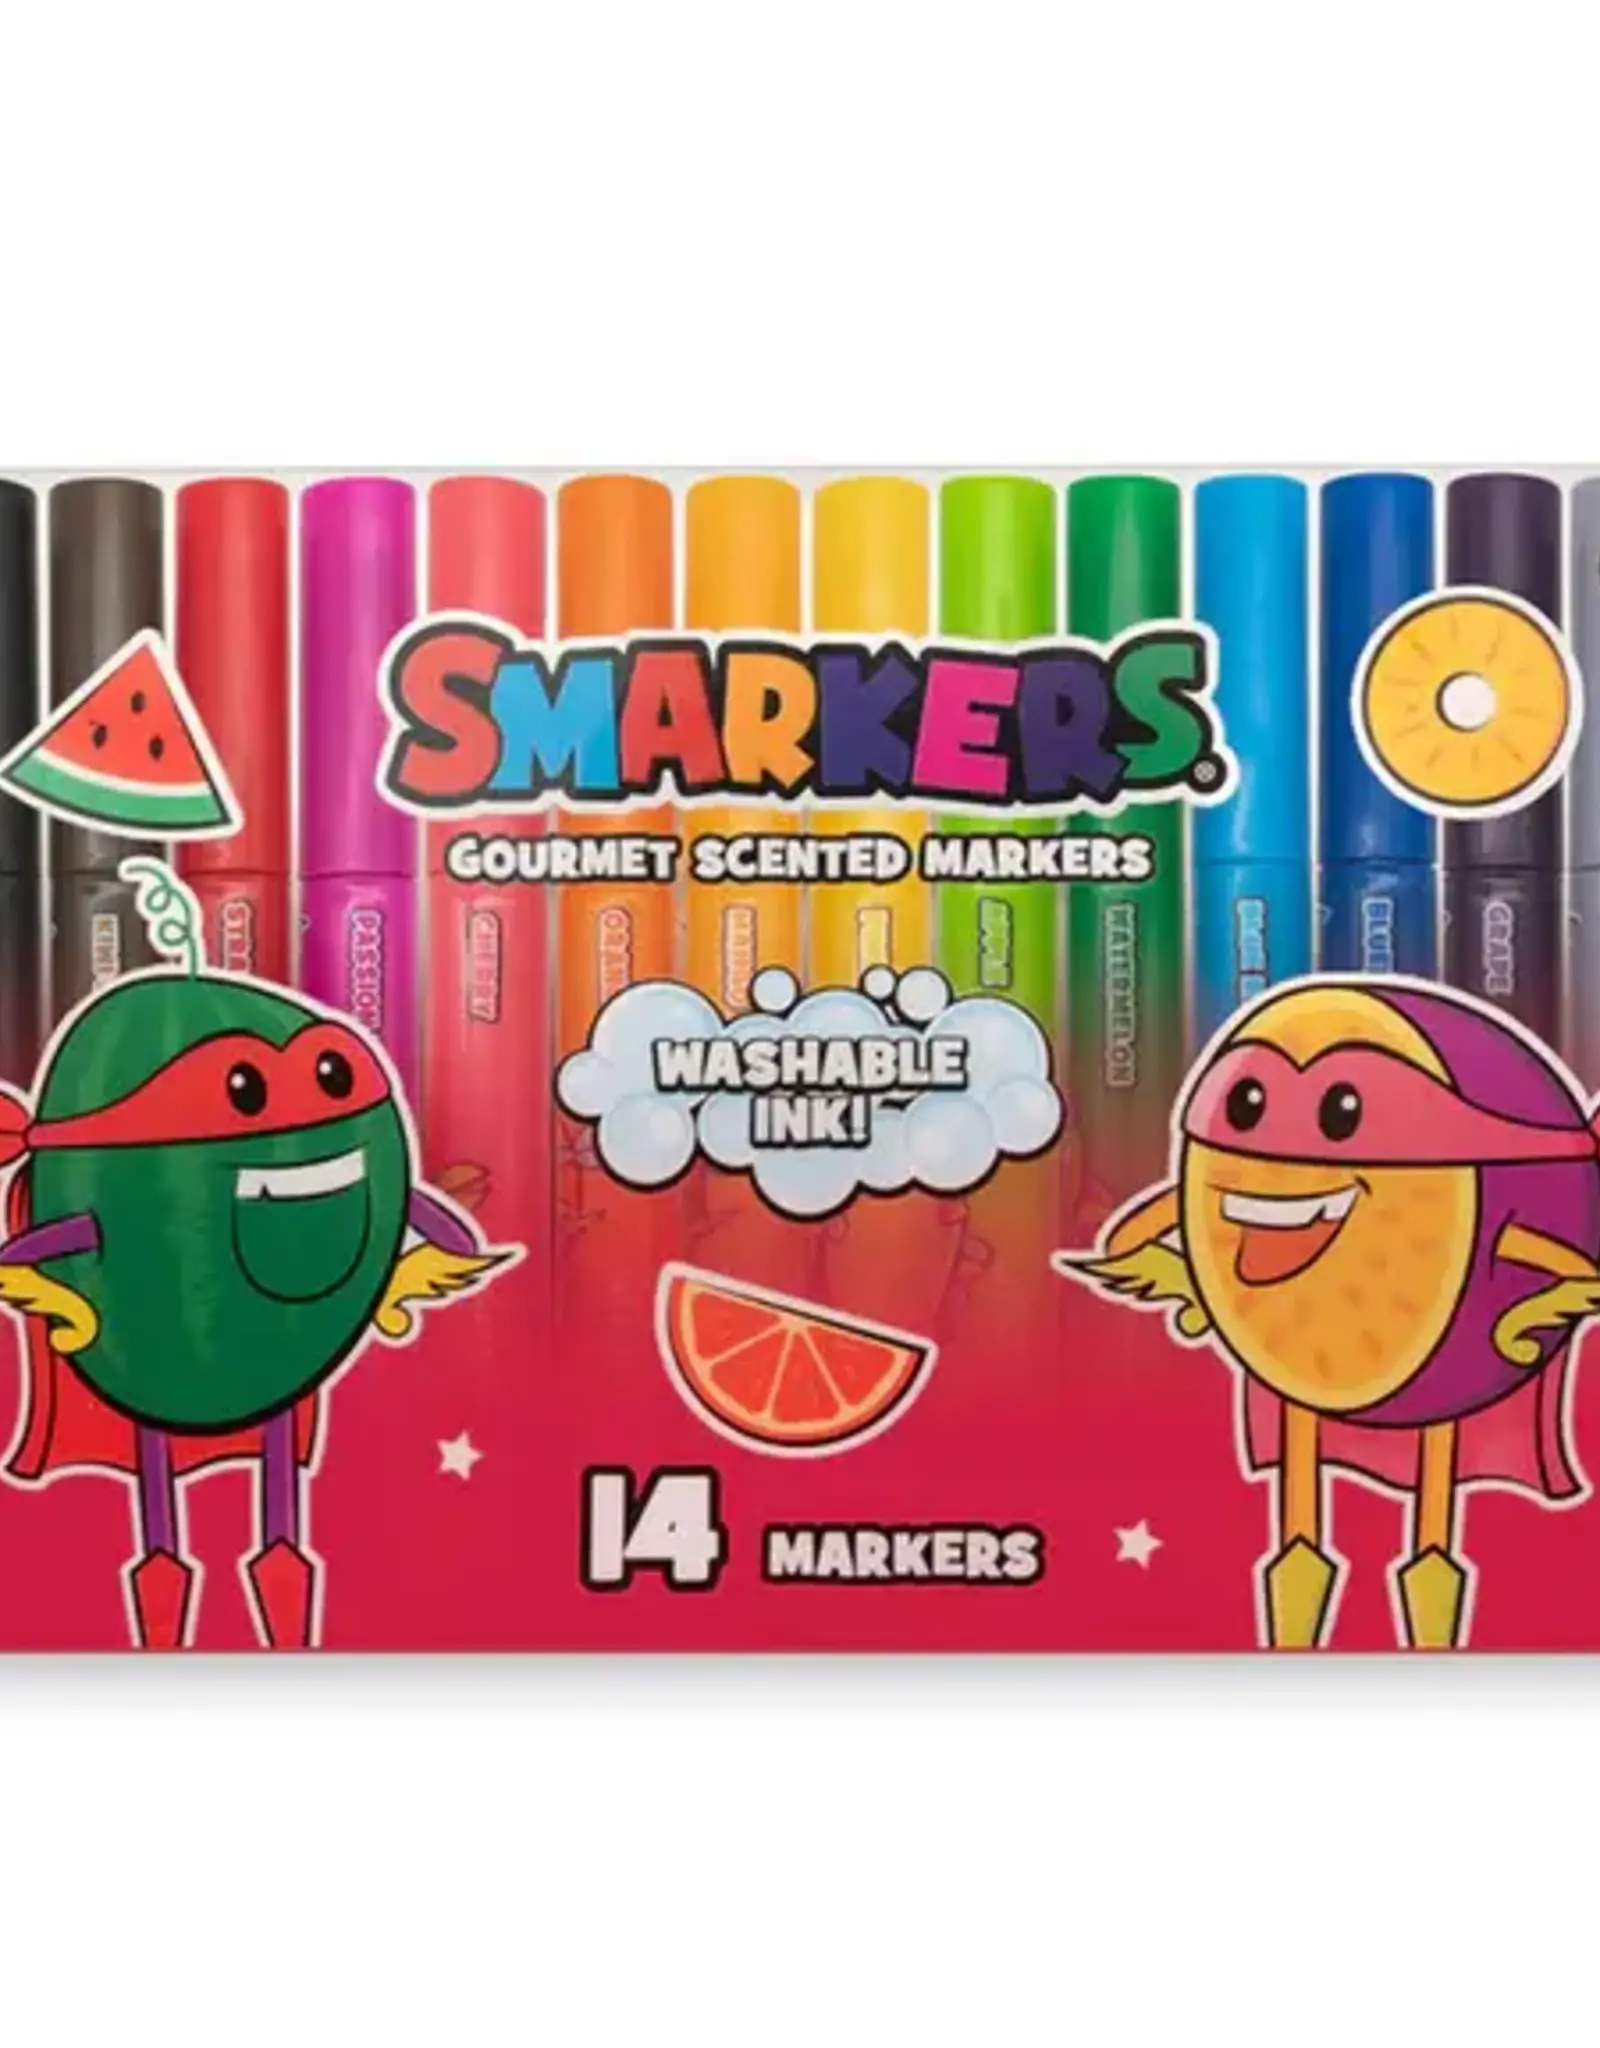 Smarkers Scented Medium-Barrel Markers 14-Pack